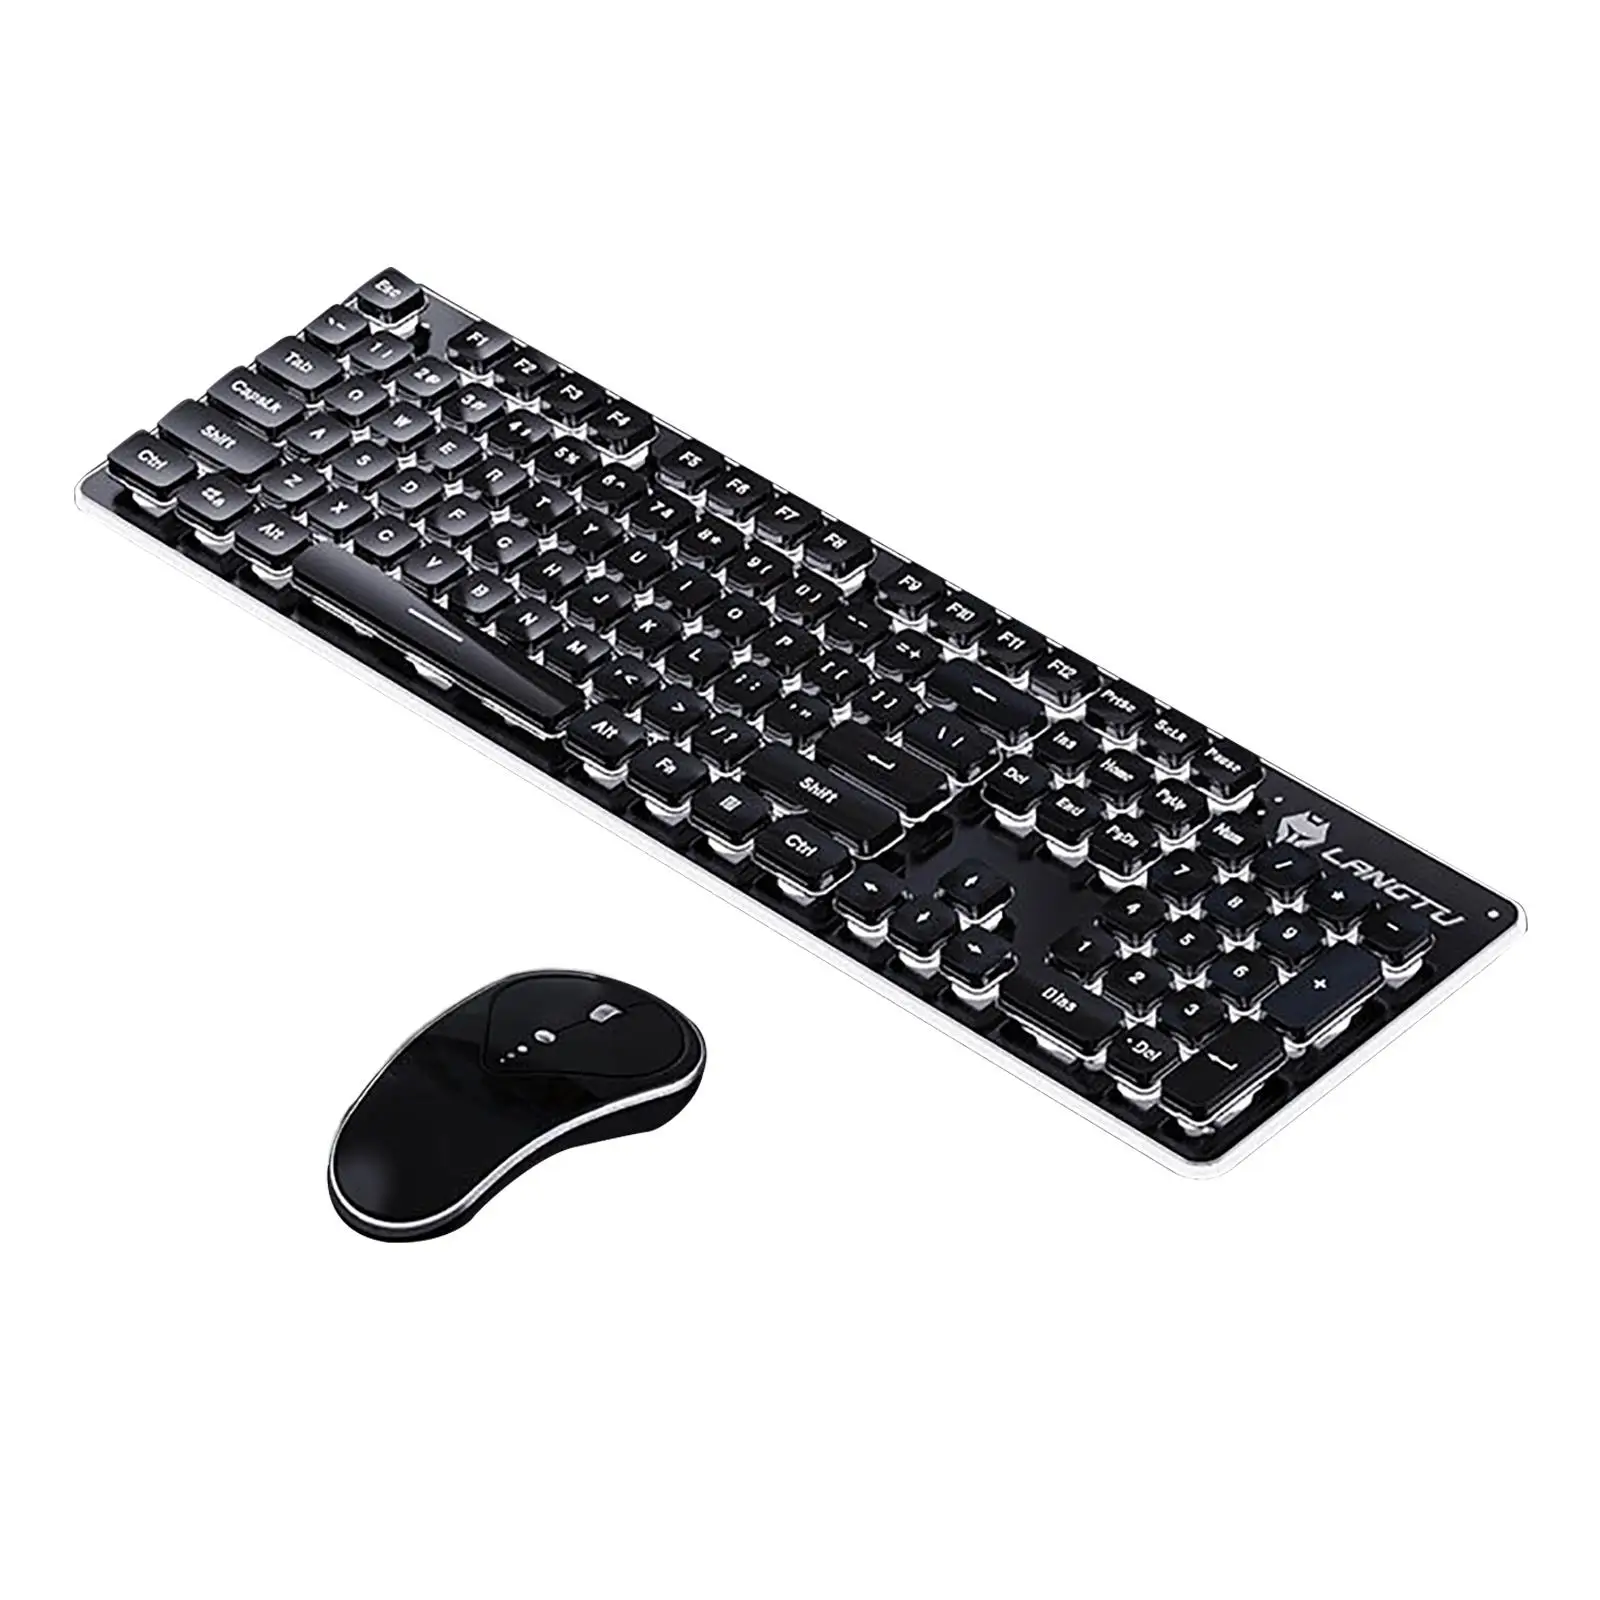 Compact 2.4G Wireless Keyboard Mouse Combo 104 Keys Ergonomic Shape Chocolate Keycaps Keyboard Mouse Set for Notebook Computer